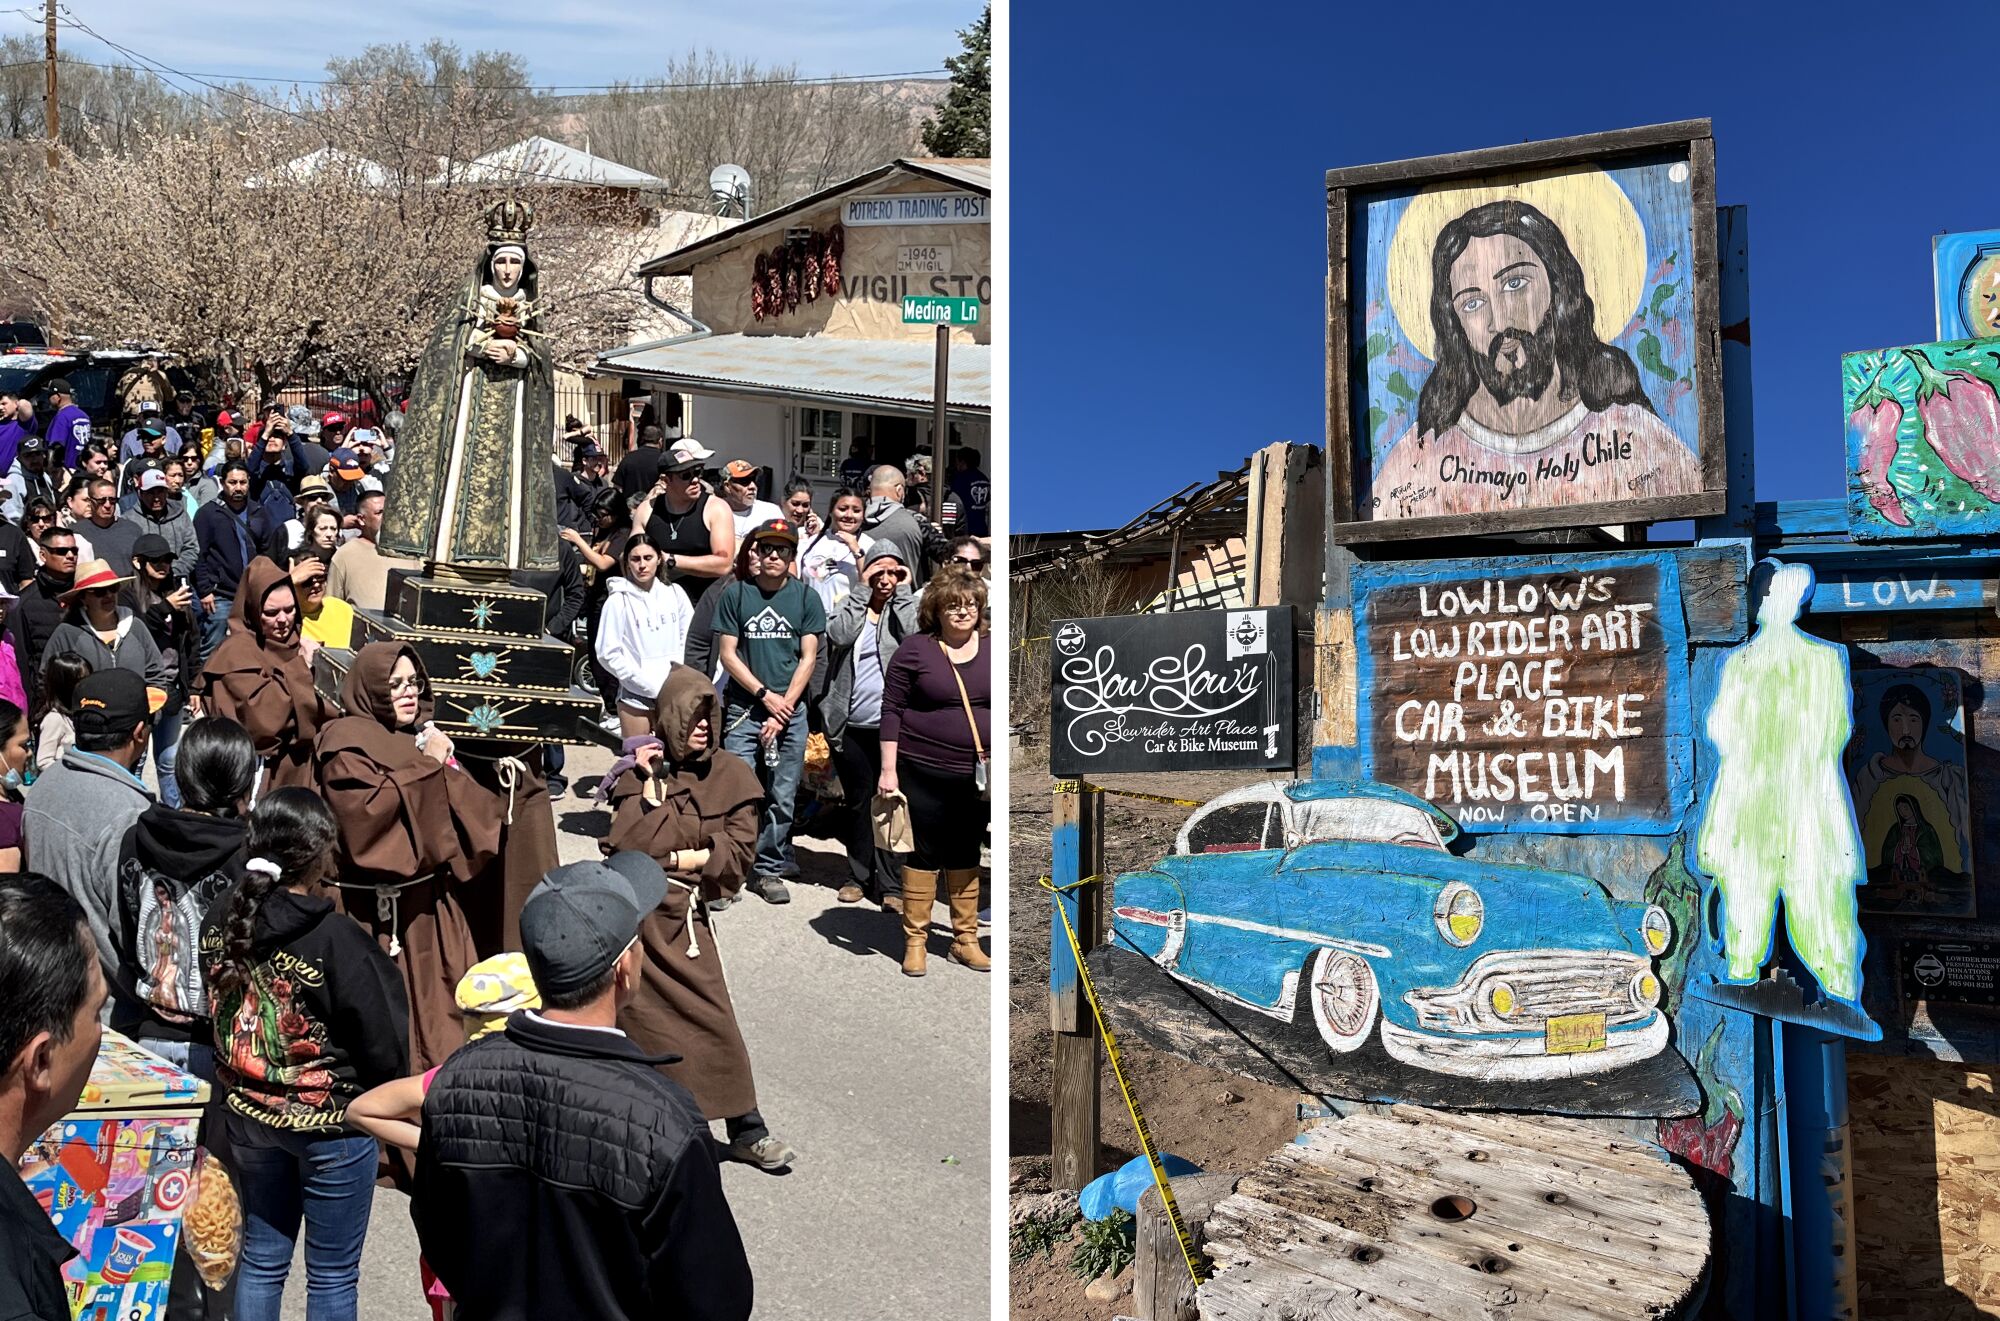 A diptych of: a Good Friday procession carries a statue of the Virgin Mary at left; and religious icons and folk art display